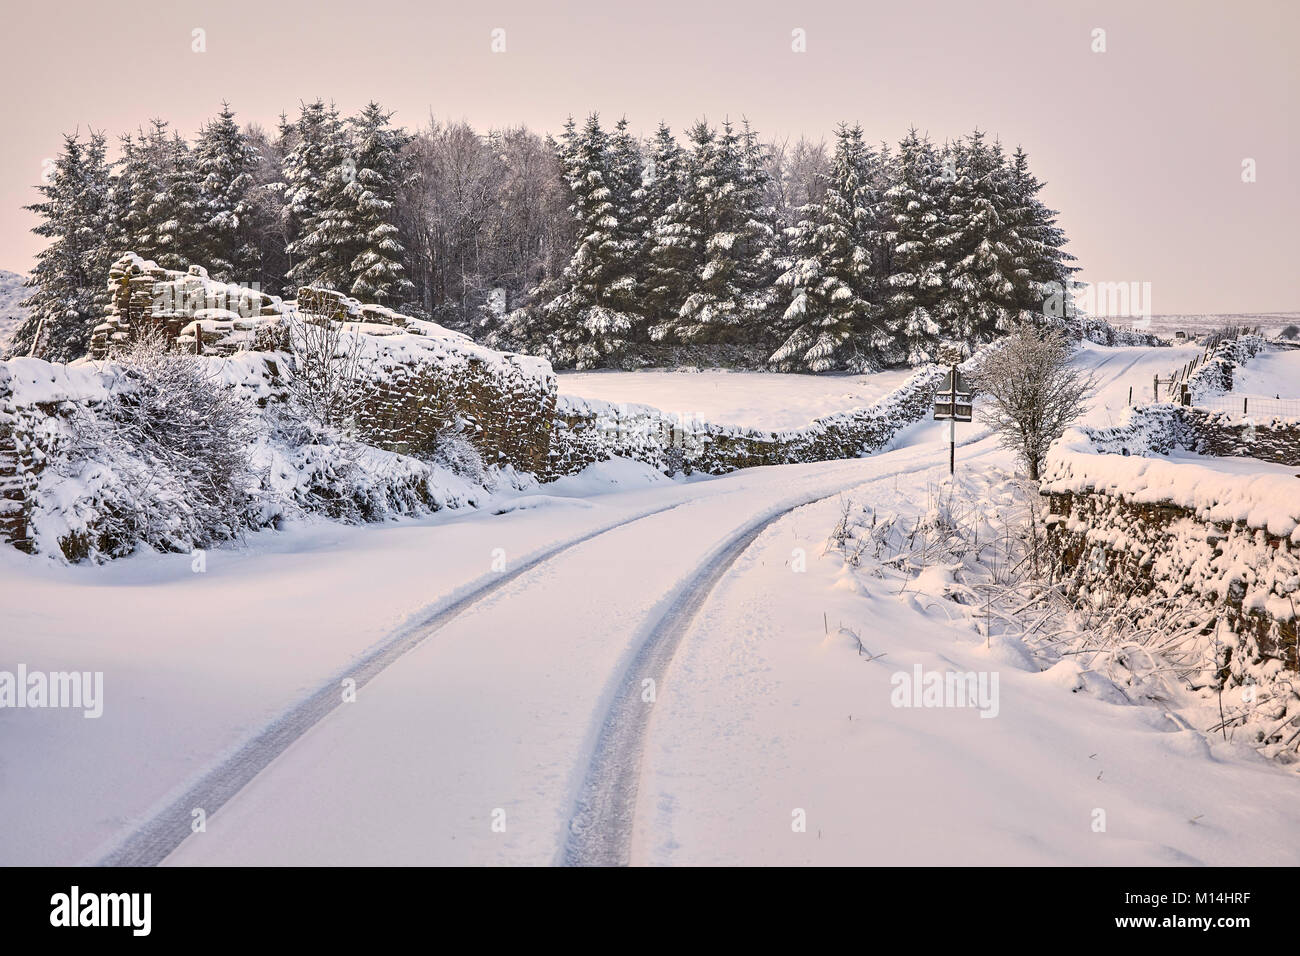 Snow laden pines and snow covered Peat Lane with single vehicle tracks. Stock Photo